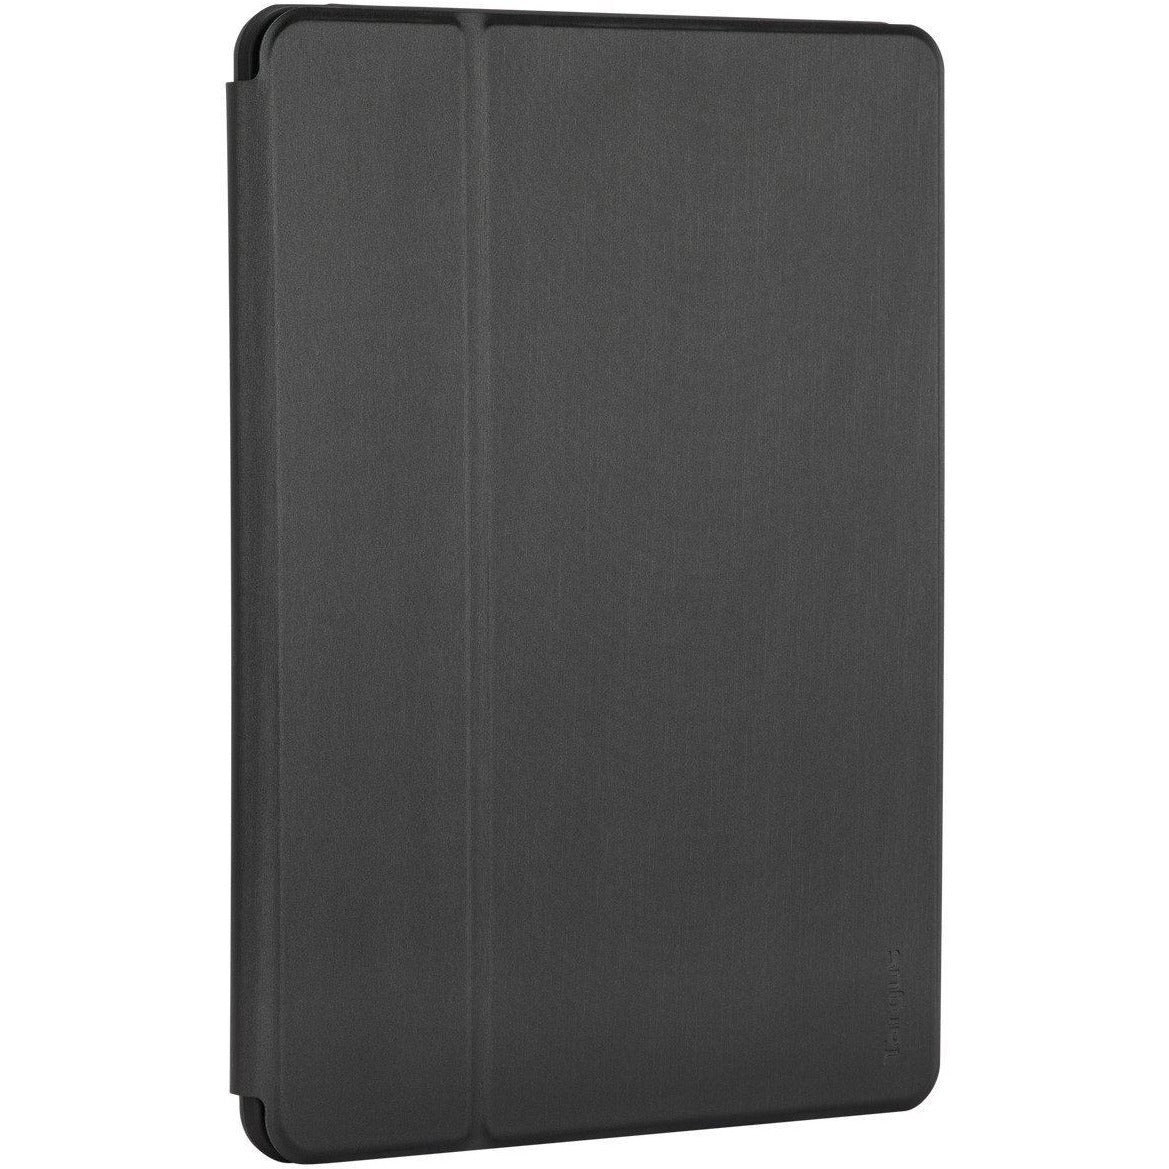 Targus Click-In THZ851GL Carrying Case (Folio) for 10.2" to 10.5" Apple iPad Air, iPad Pro, iPad (7th Generation) Tablet - Black